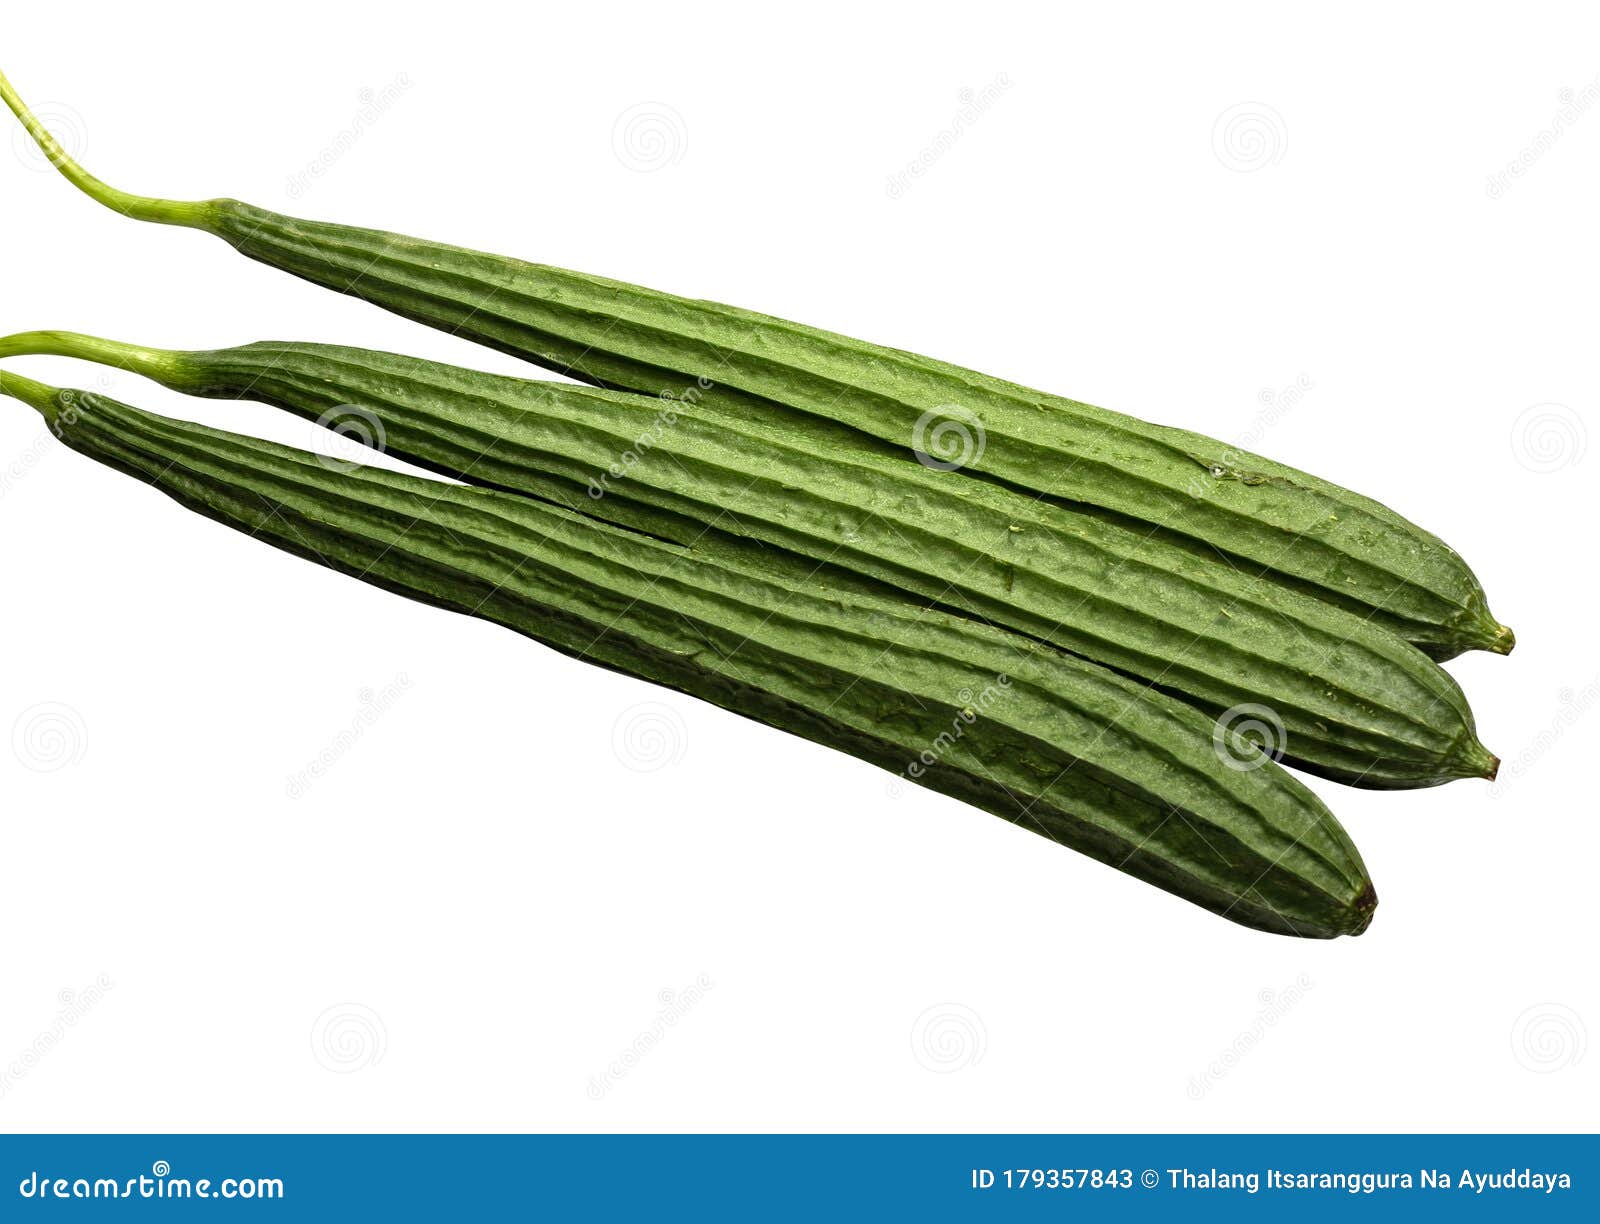 freshness three green angled loofah or aculangula vegetable long size .  on white background with clipping path